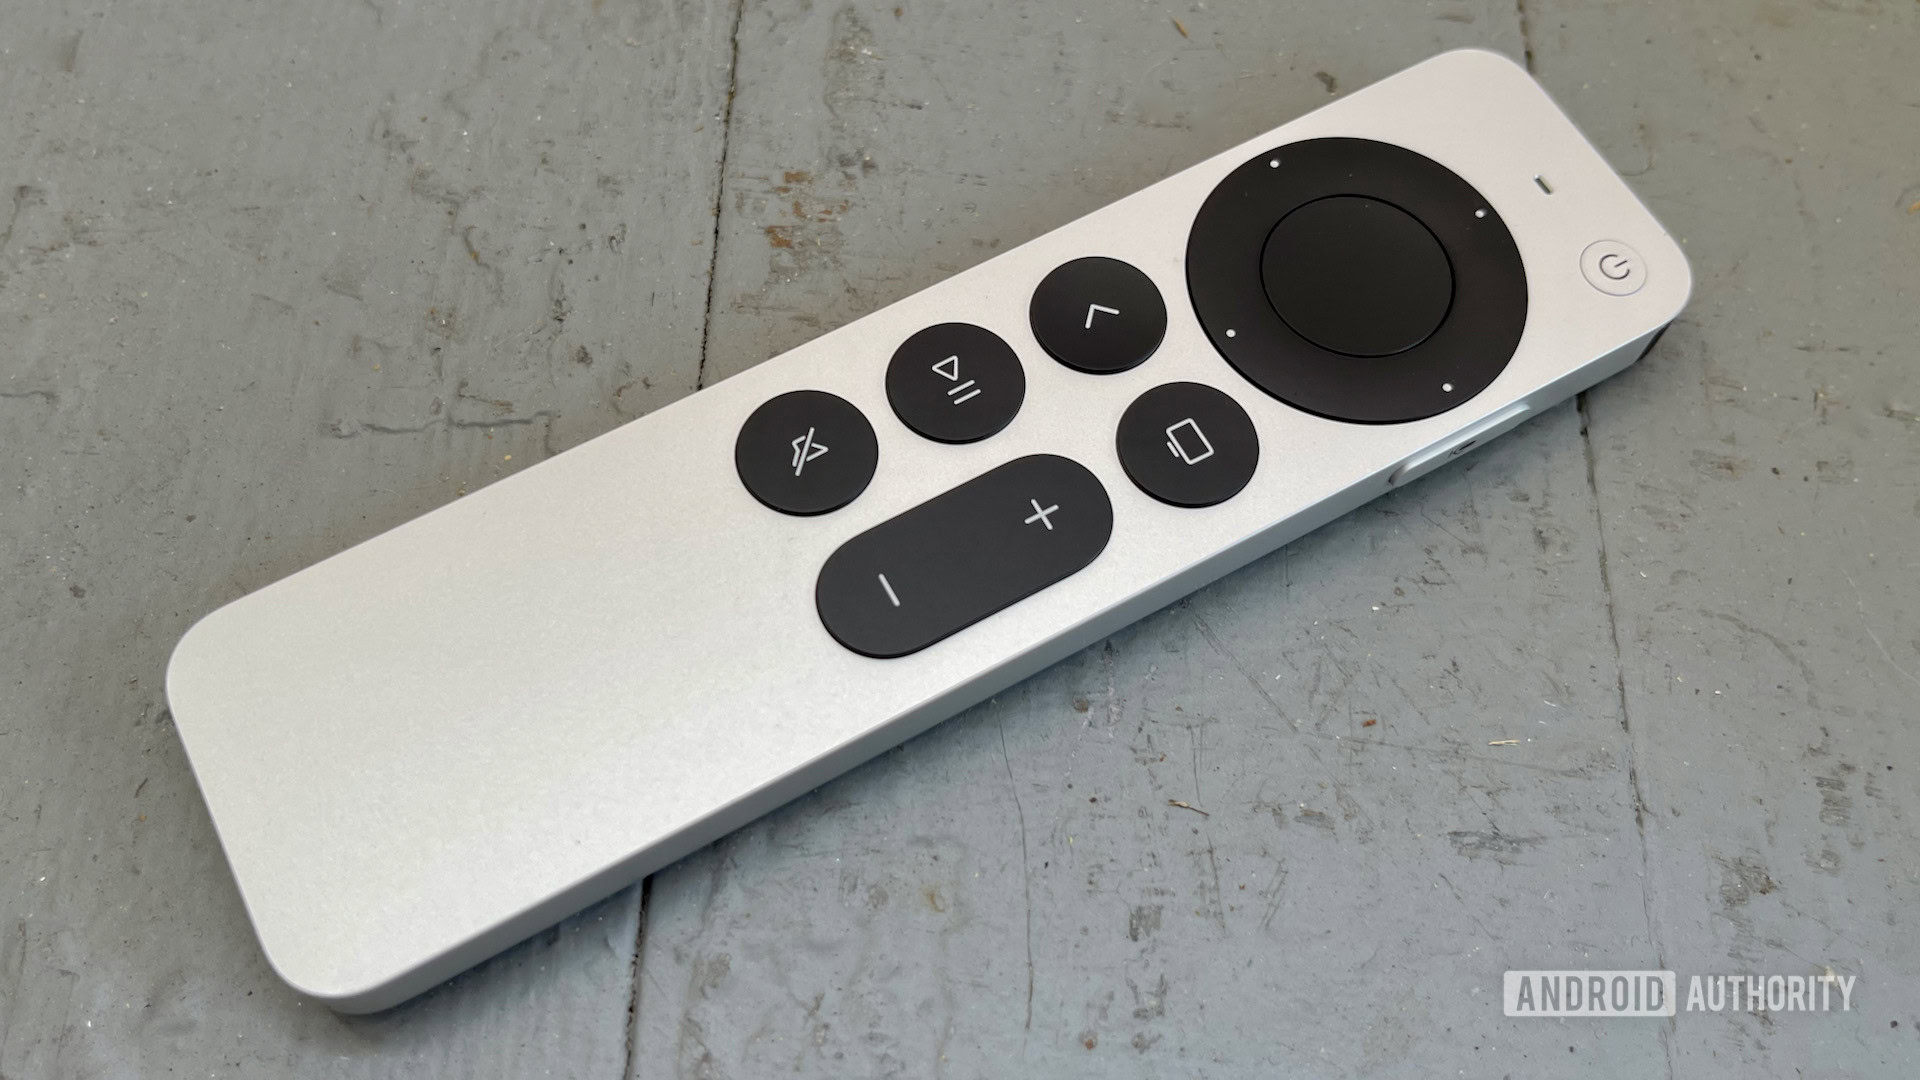 The Apple TV 4K new remote.